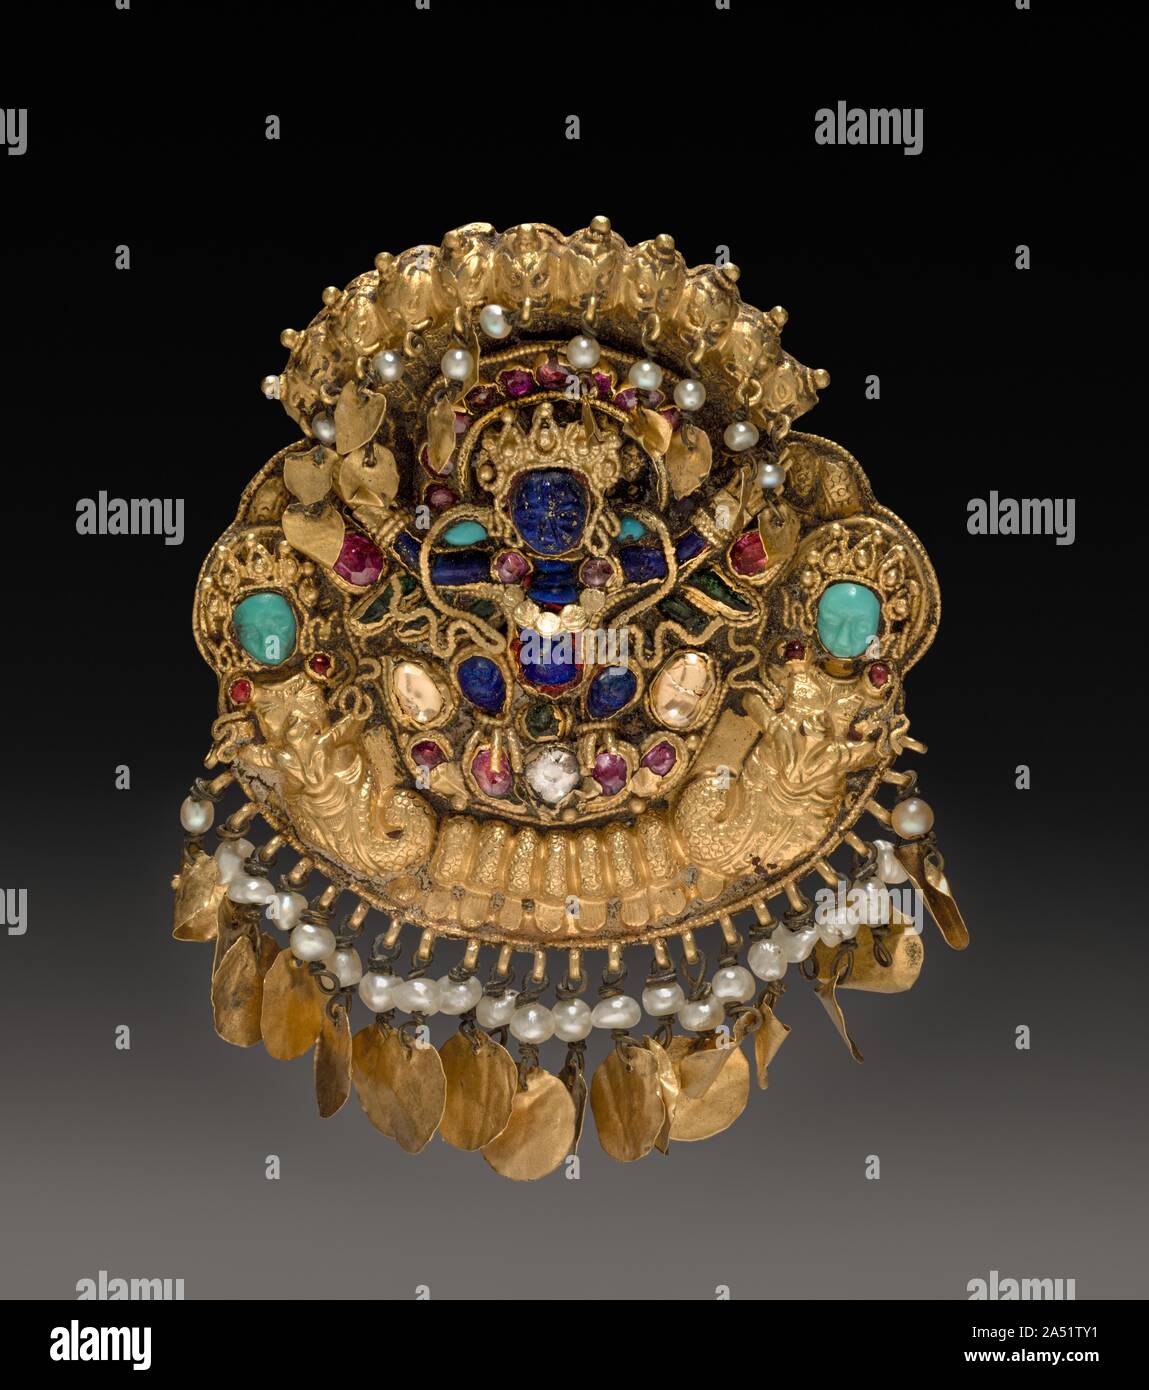 Pendant with Two-Armed Blue Deity on a Lotus with Nagas (serpent divinities), 1600s or 1700s. Stock Photo